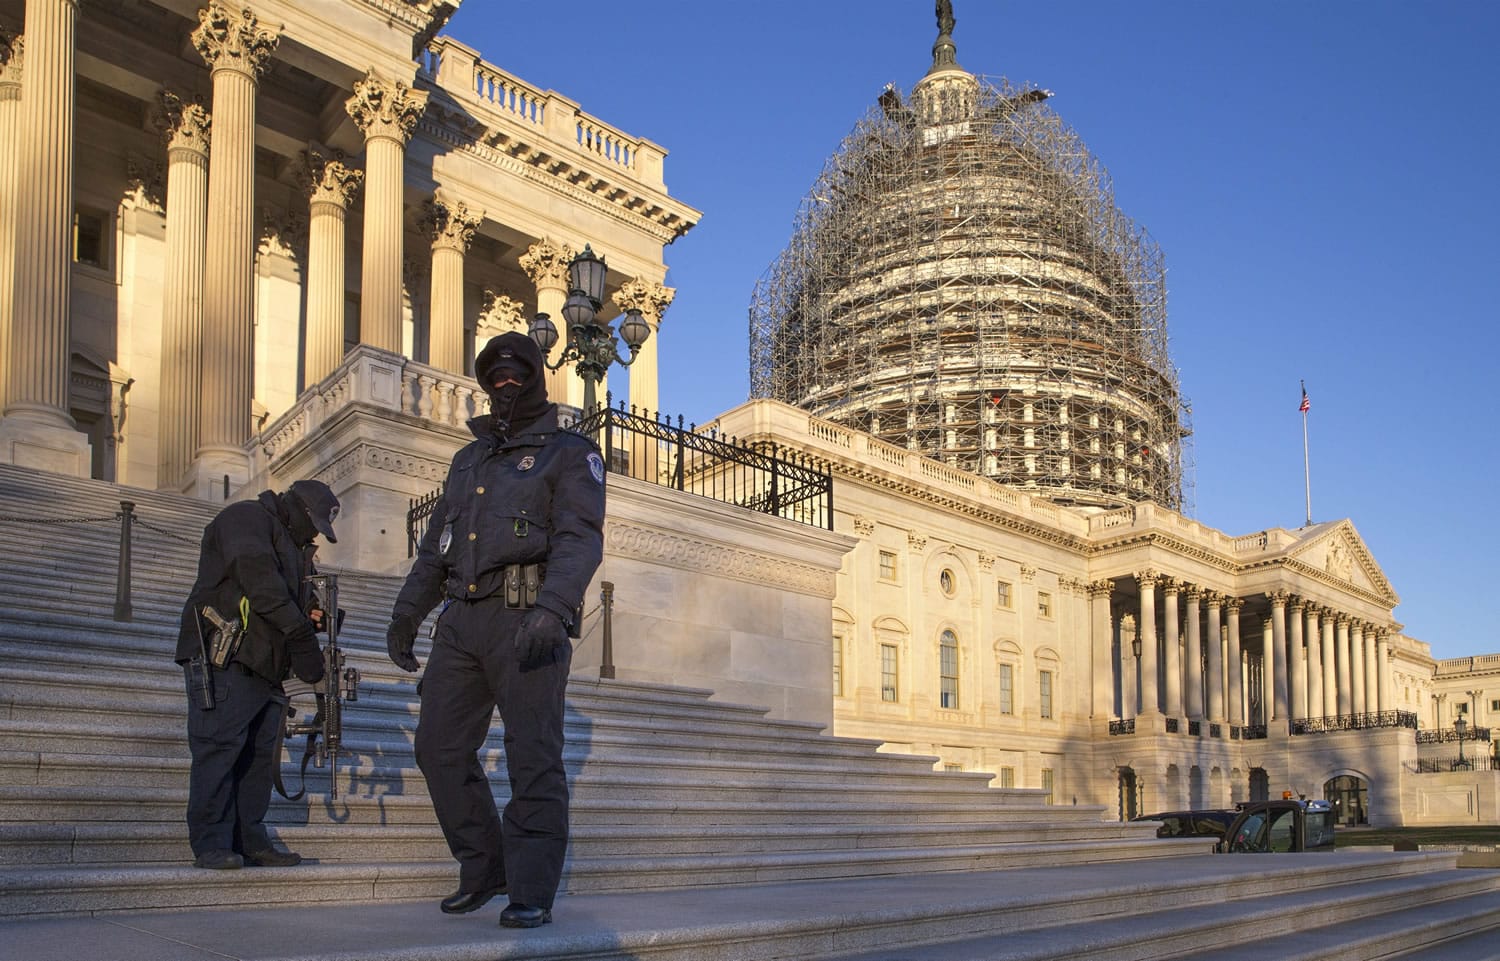 U.S. Capitol Police officers endure sub-freezing temperatures as lawmakers return to work after the holiday break on Tuesday in Washington, D.C. (J.